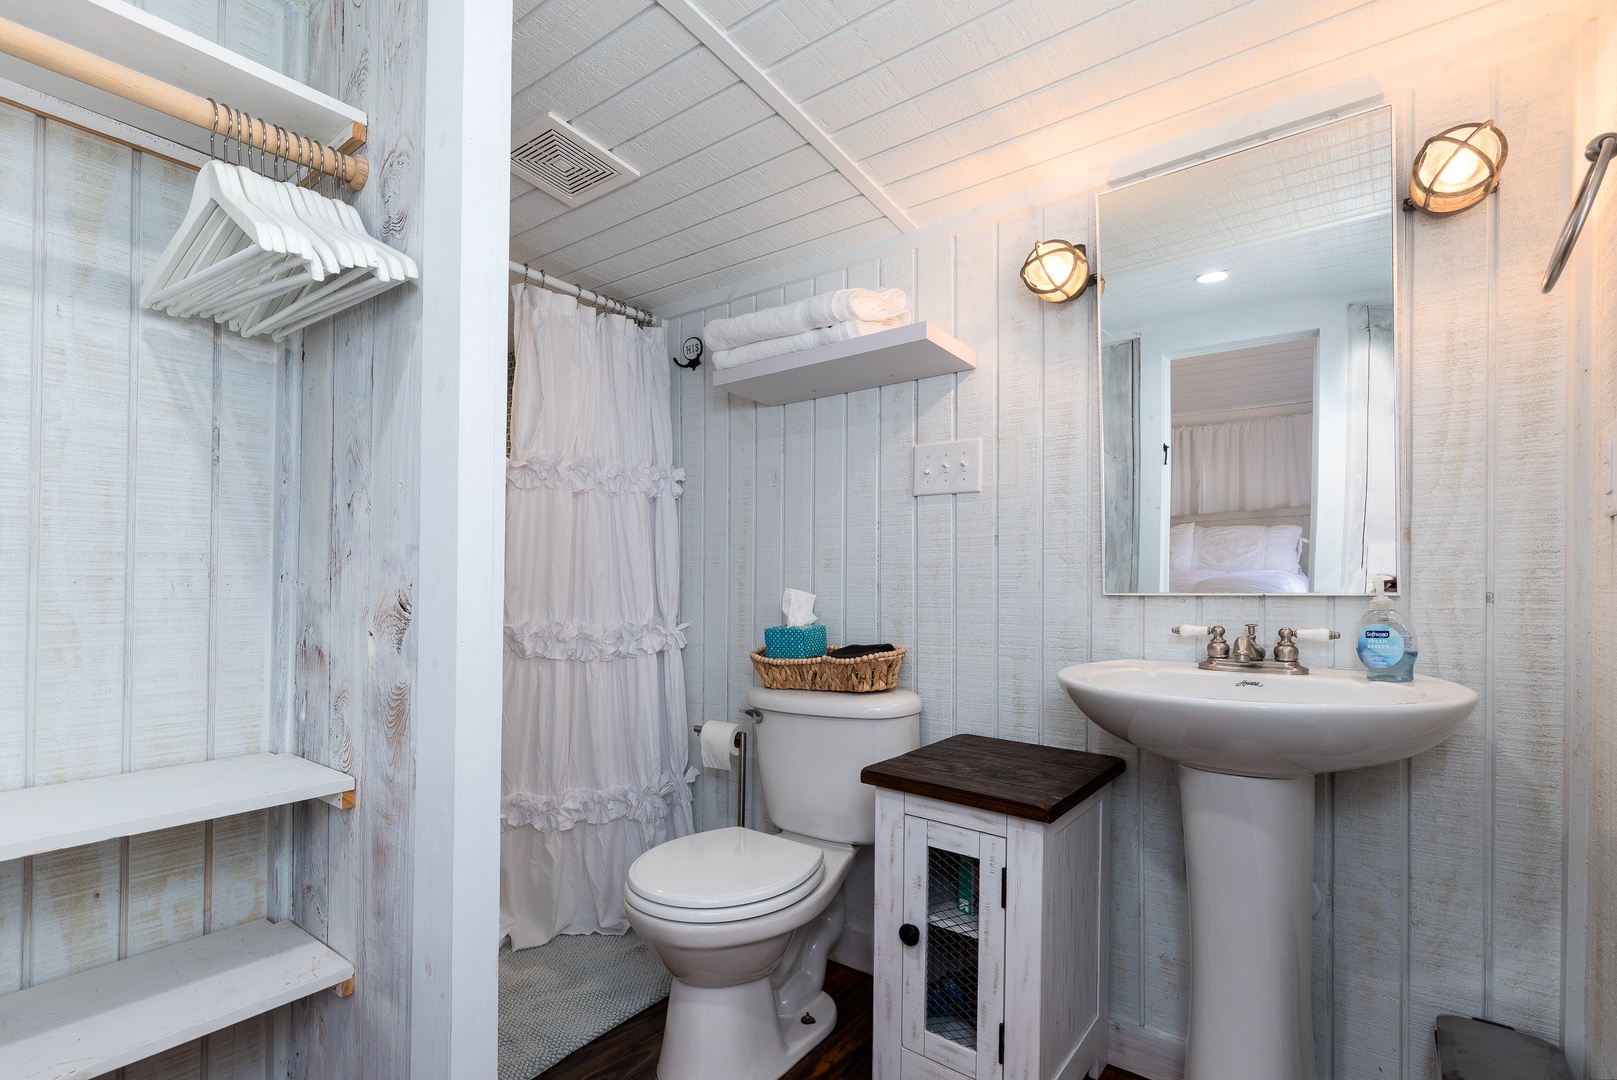 The full bathroom offers closet space, a single vanity & walk-in shower